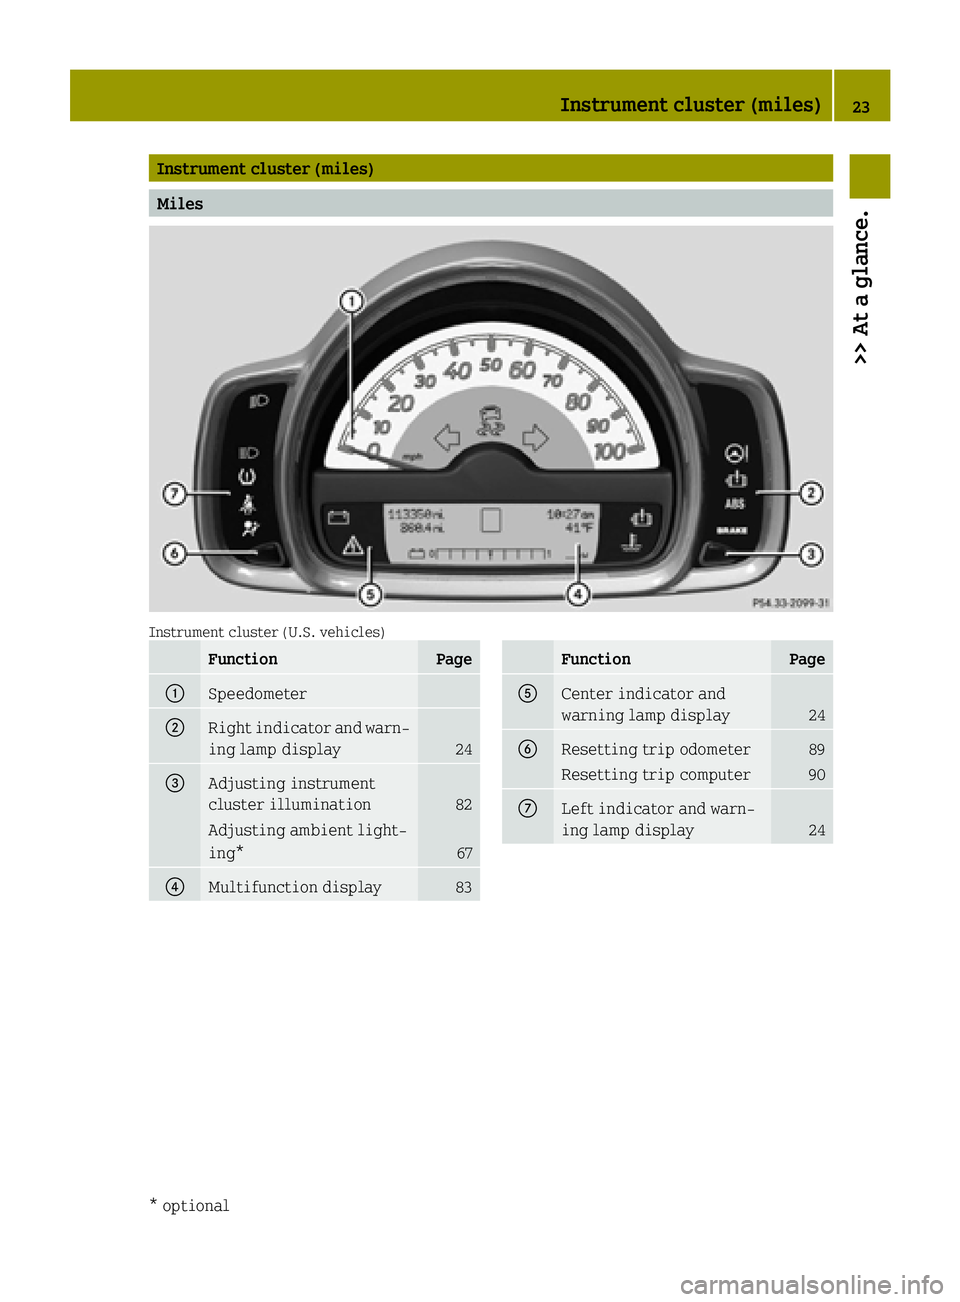 SMART FORTWO COUPE ELECTRIC DRIVE 2015 Owners Manual Instrument cluster (miles)
Miles
Instrument cluster (U.S. vehicles)
Function Page
:
Speedometer
;
Right indicator and warn-
ing lamp display 24
=
Adjusting instrument
cluster illumination
82
Adjusting